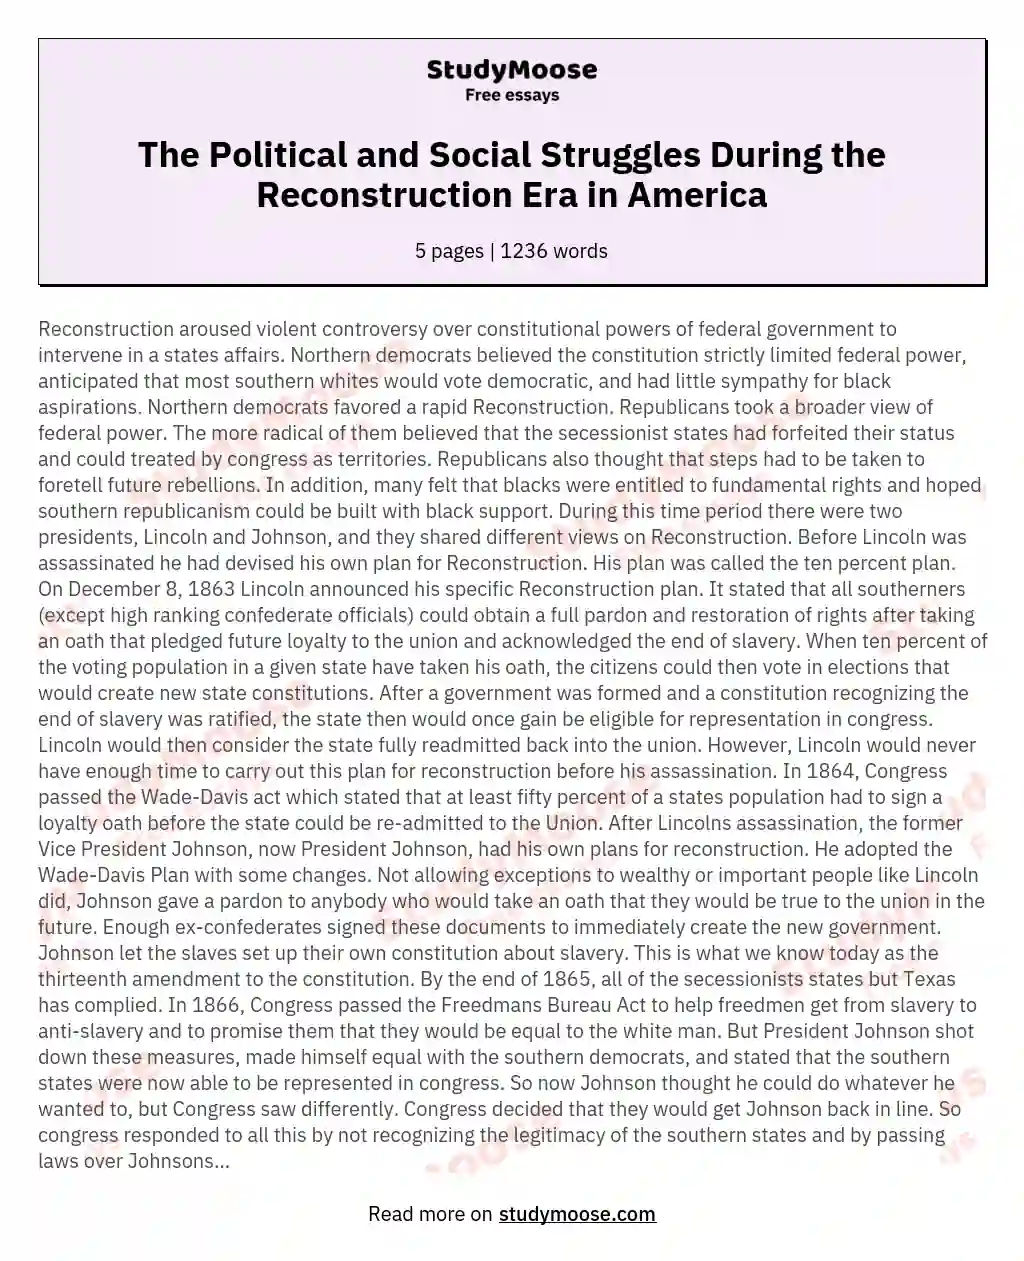 The Political and Social Struggles During the Reconstruction Era in America essay